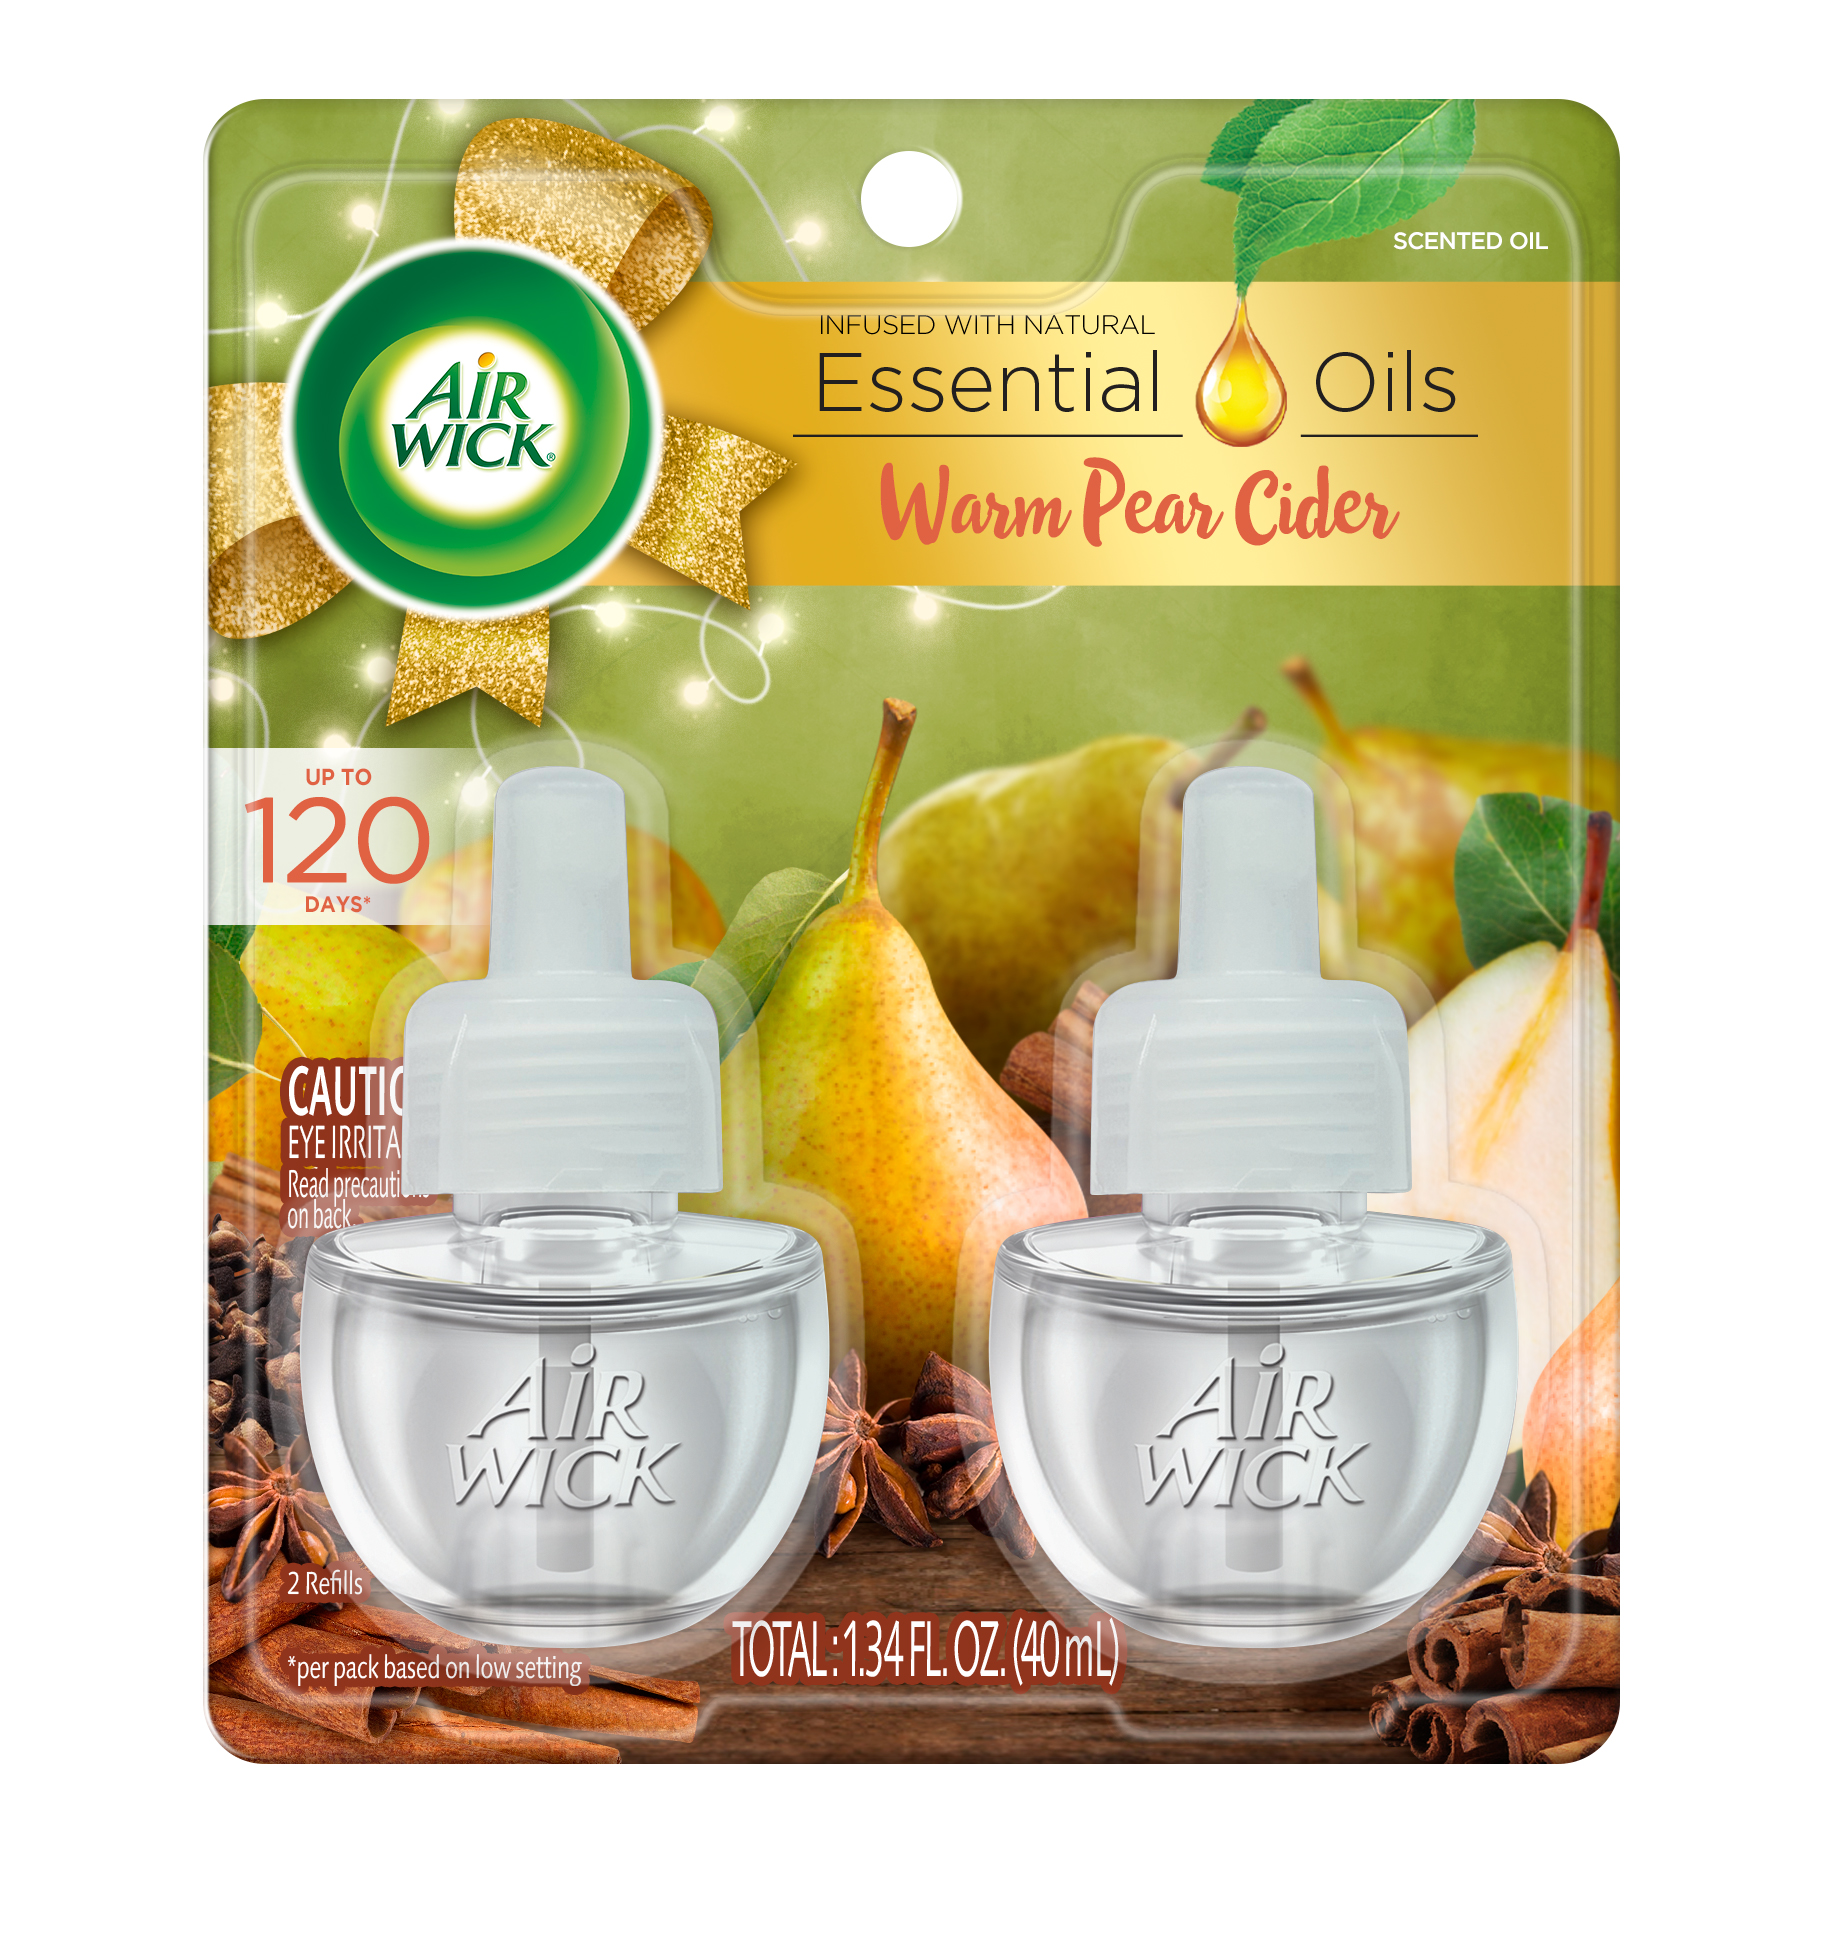 AIR WICK Scented Oil  Warm Pear Cider